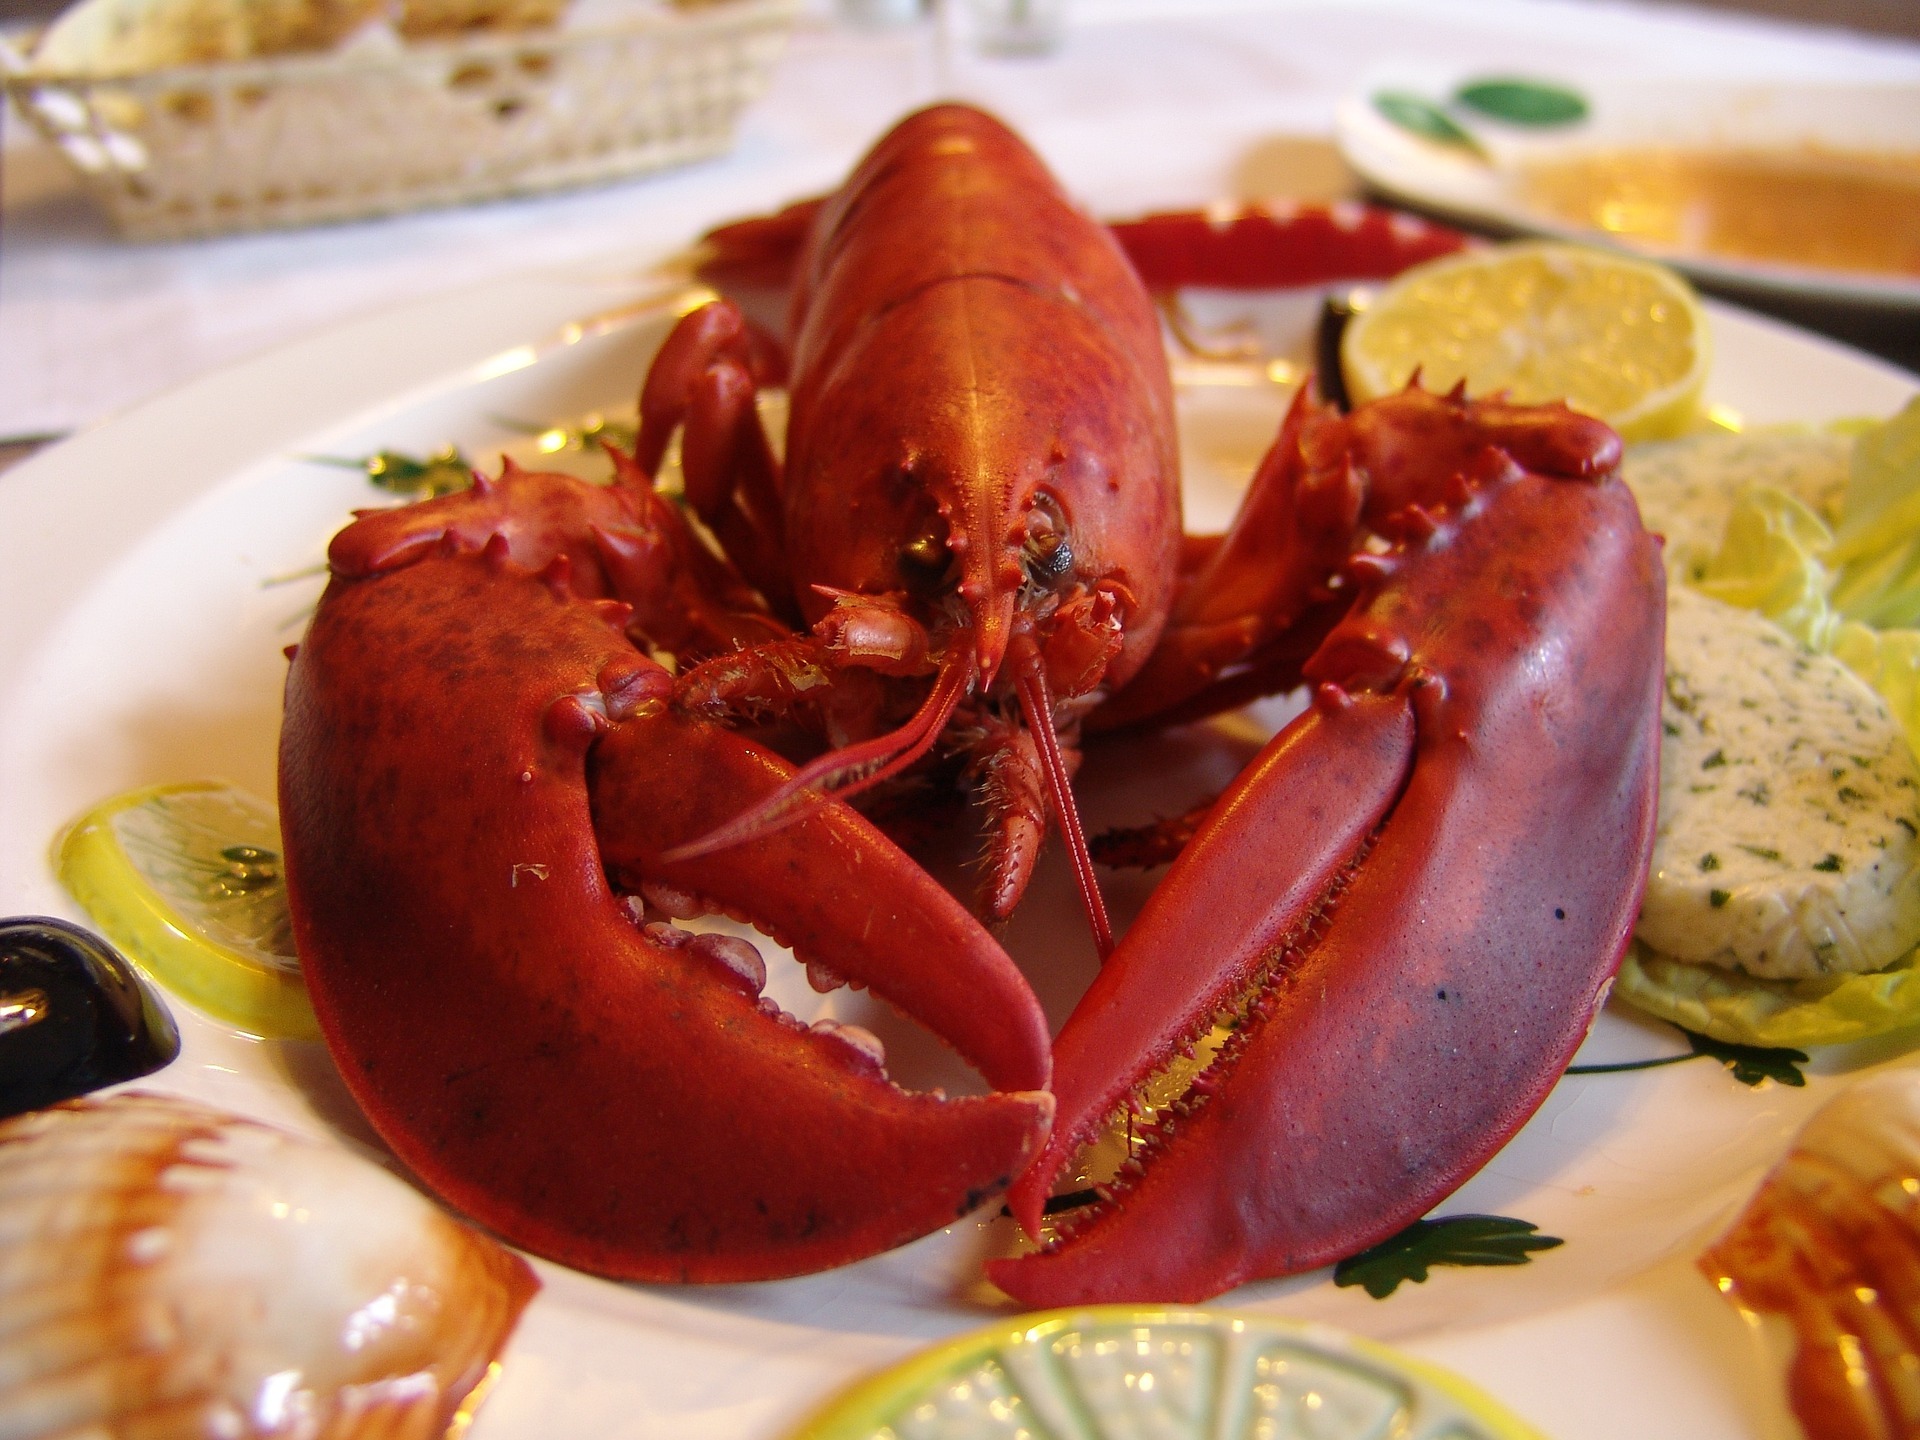 Best Lobster in Boston 2020: 13 Places with Top Lobster Dishes